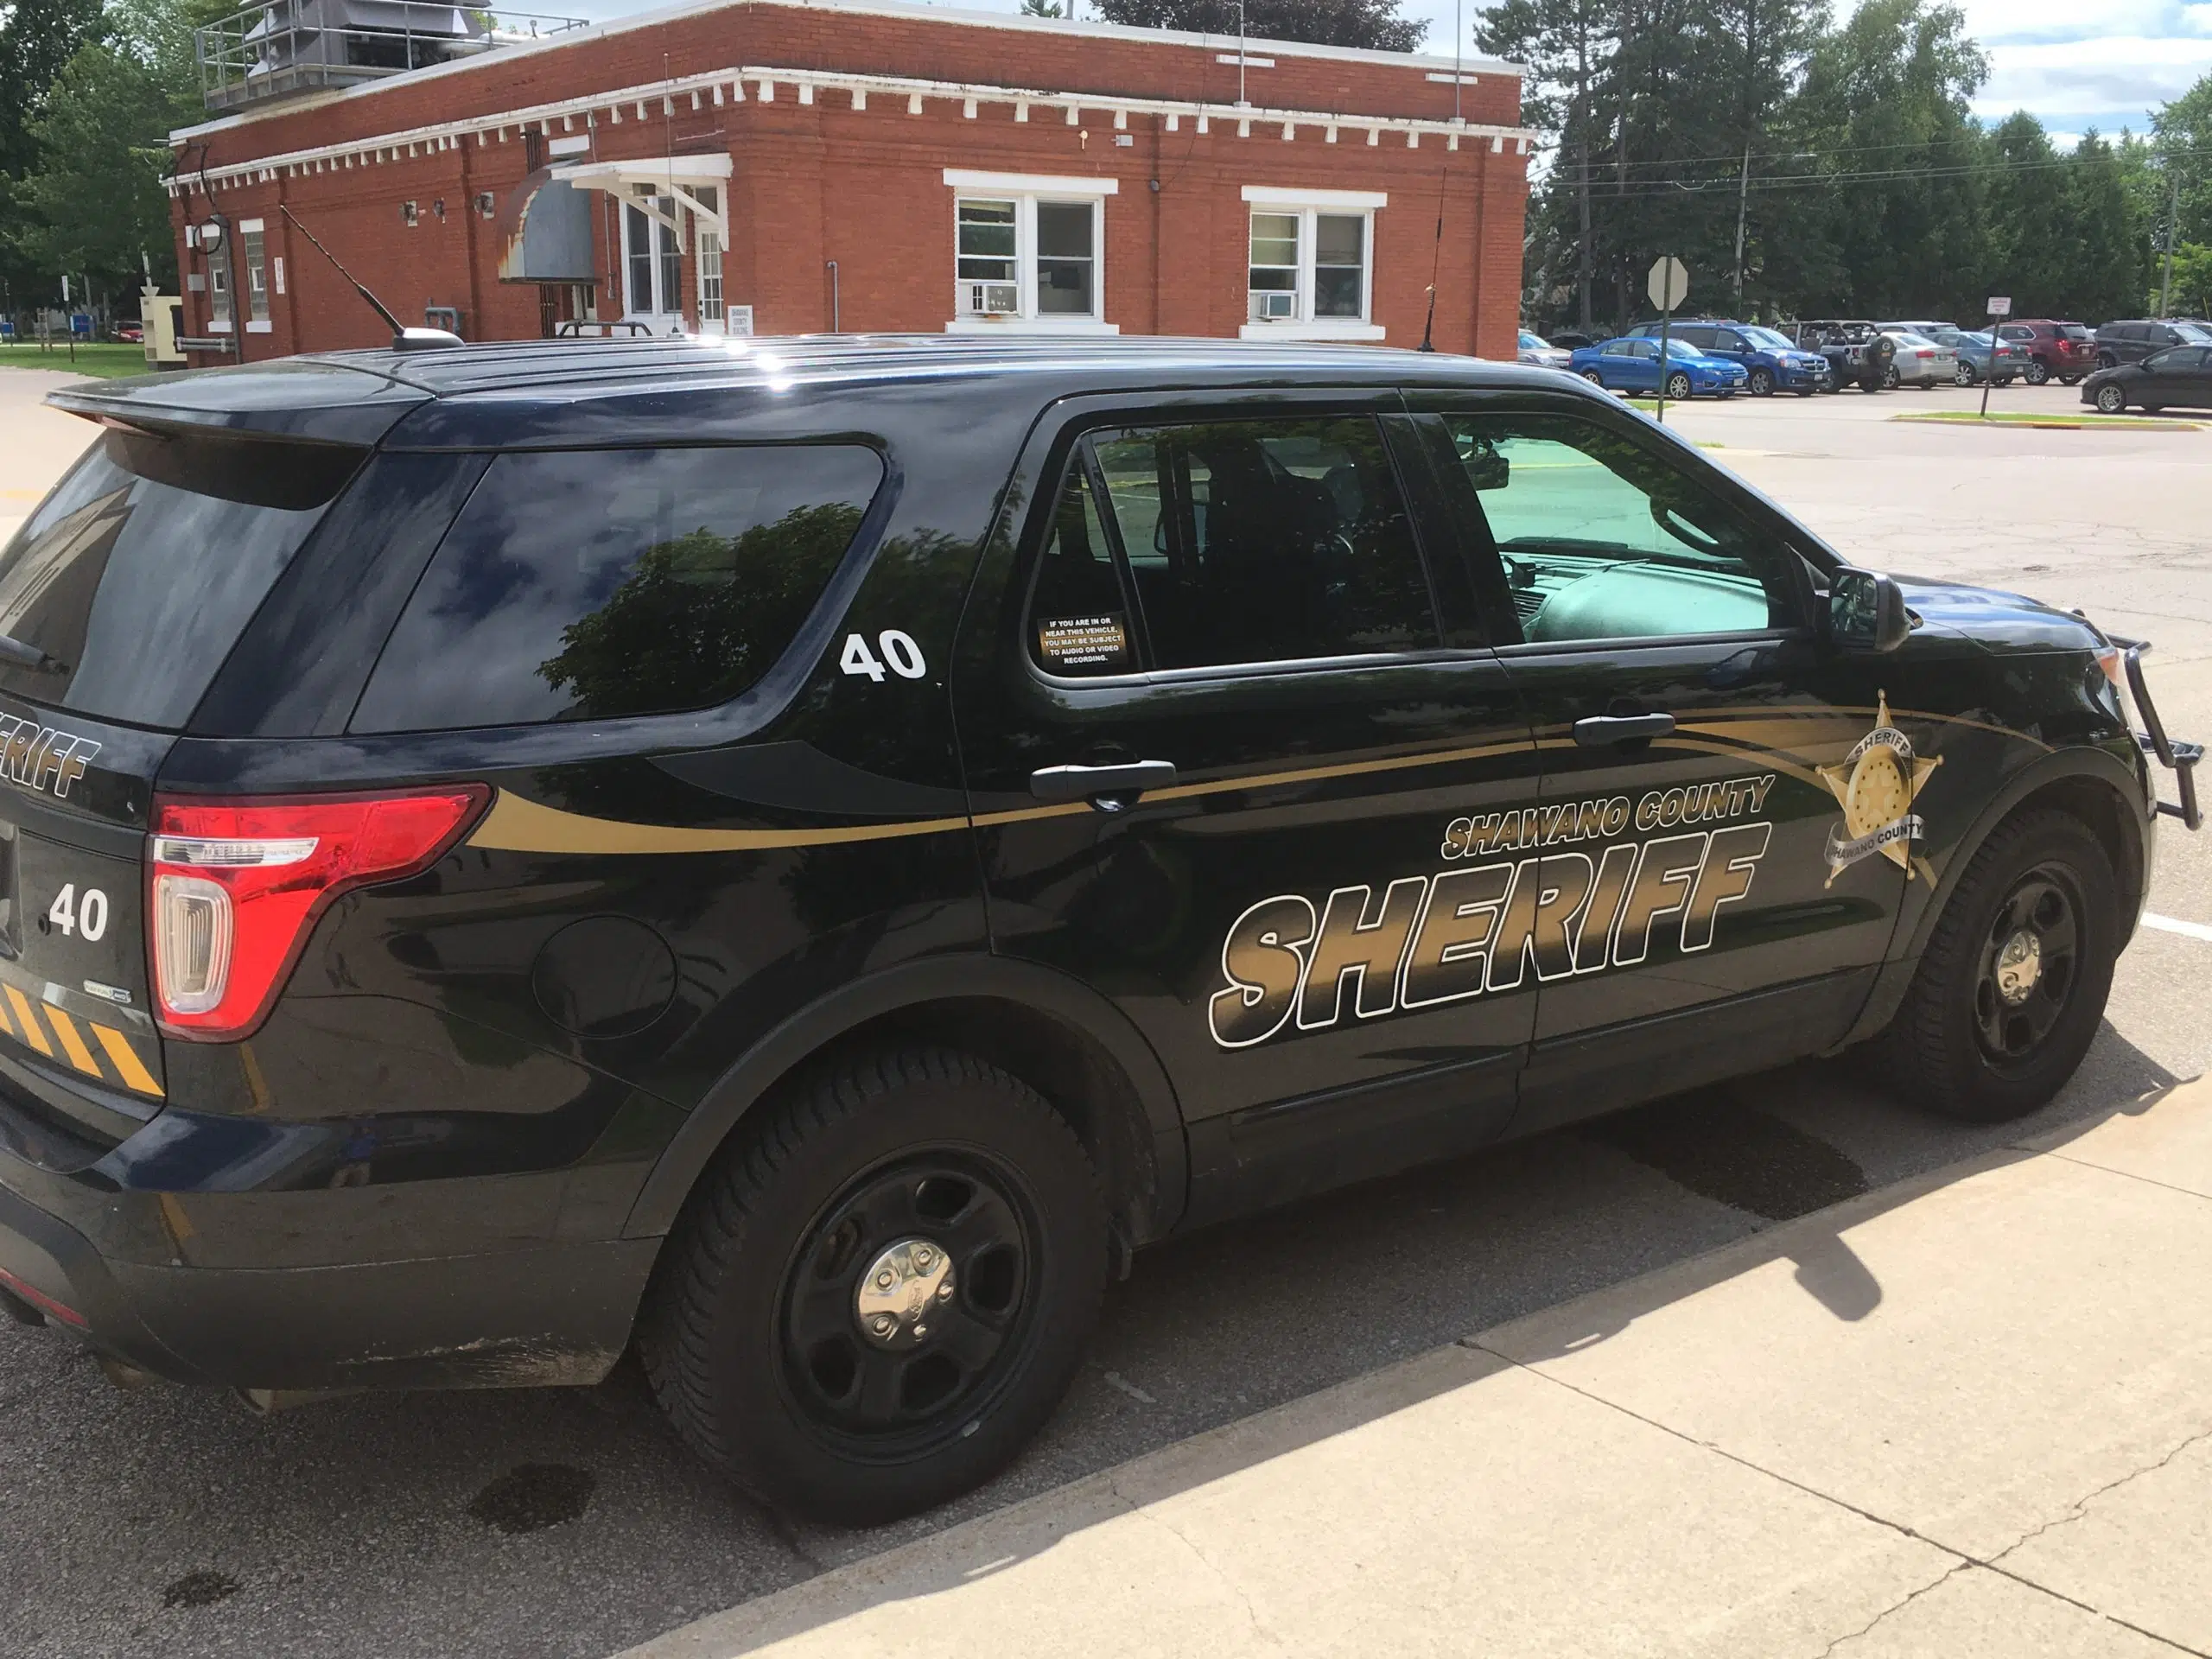 Shawano County Woman Stabbed, Rescued By Passerby